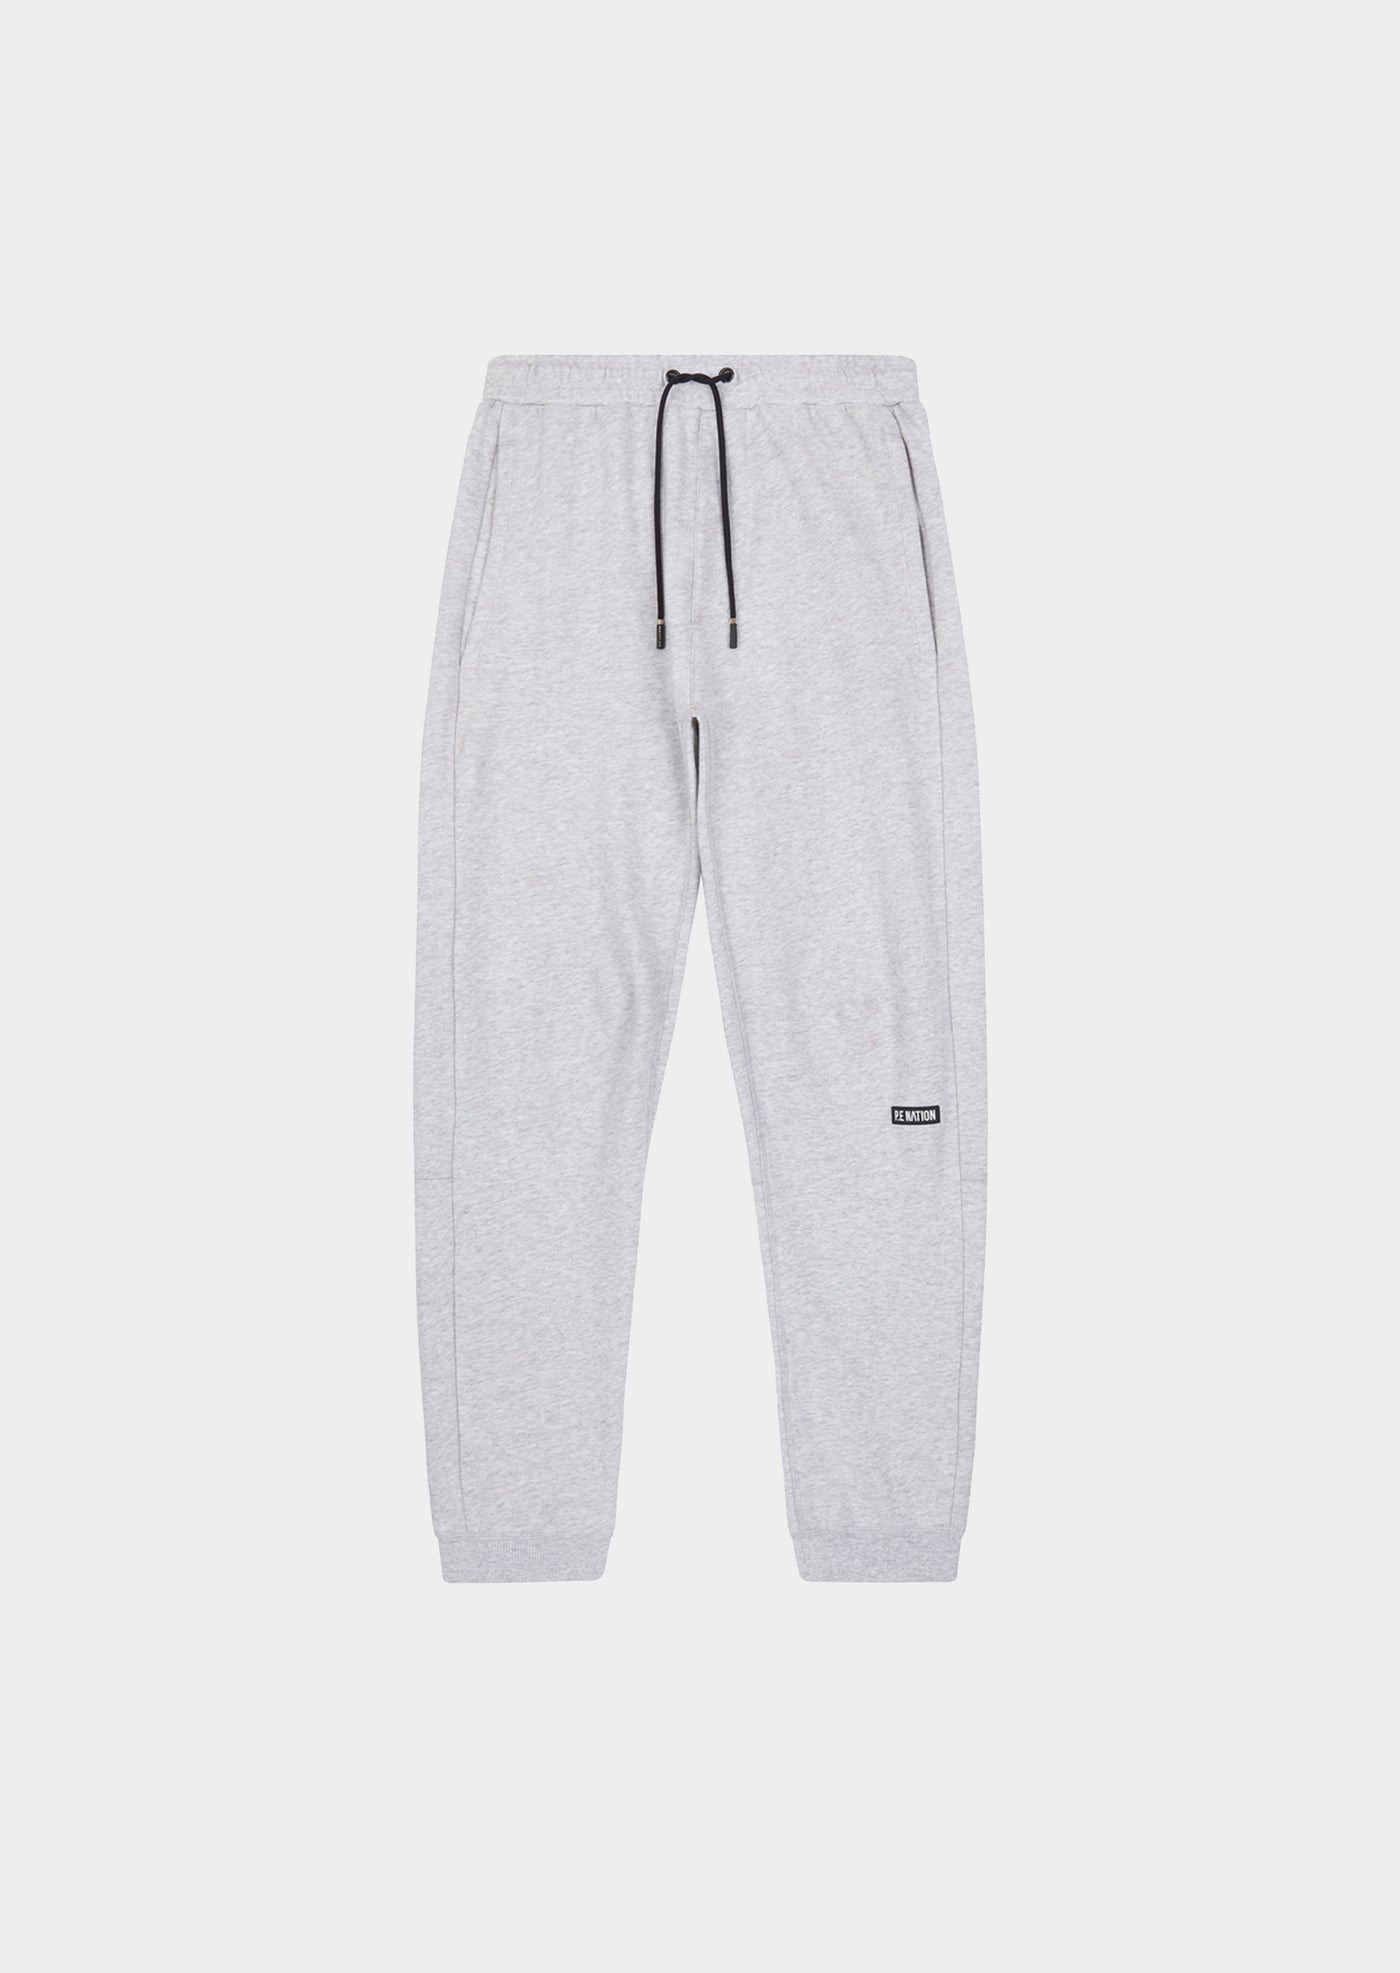 FORTITUDE TRACK PANT IN GREY